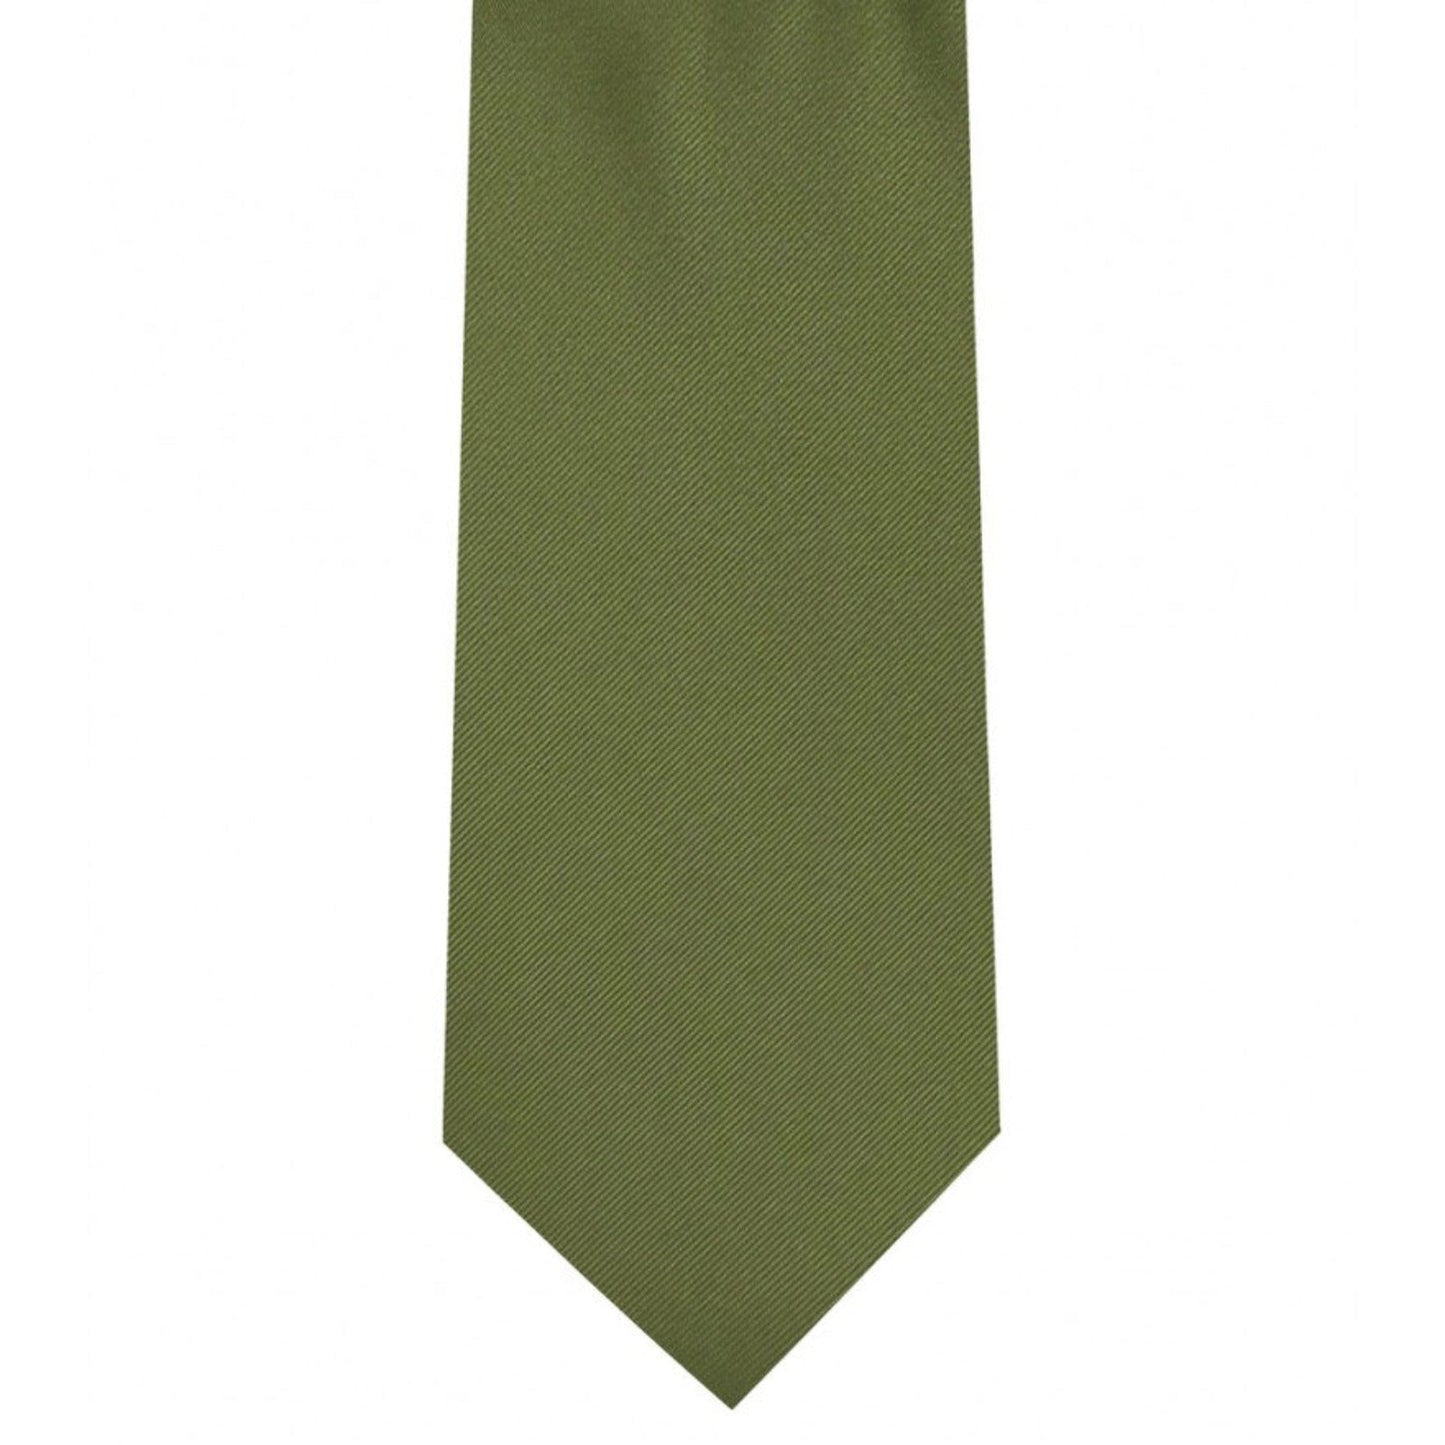 Classic Dark Olive Tie Ultra Skinny tie width 2.25 inches With Matching Pocket Square | KCT Menswear